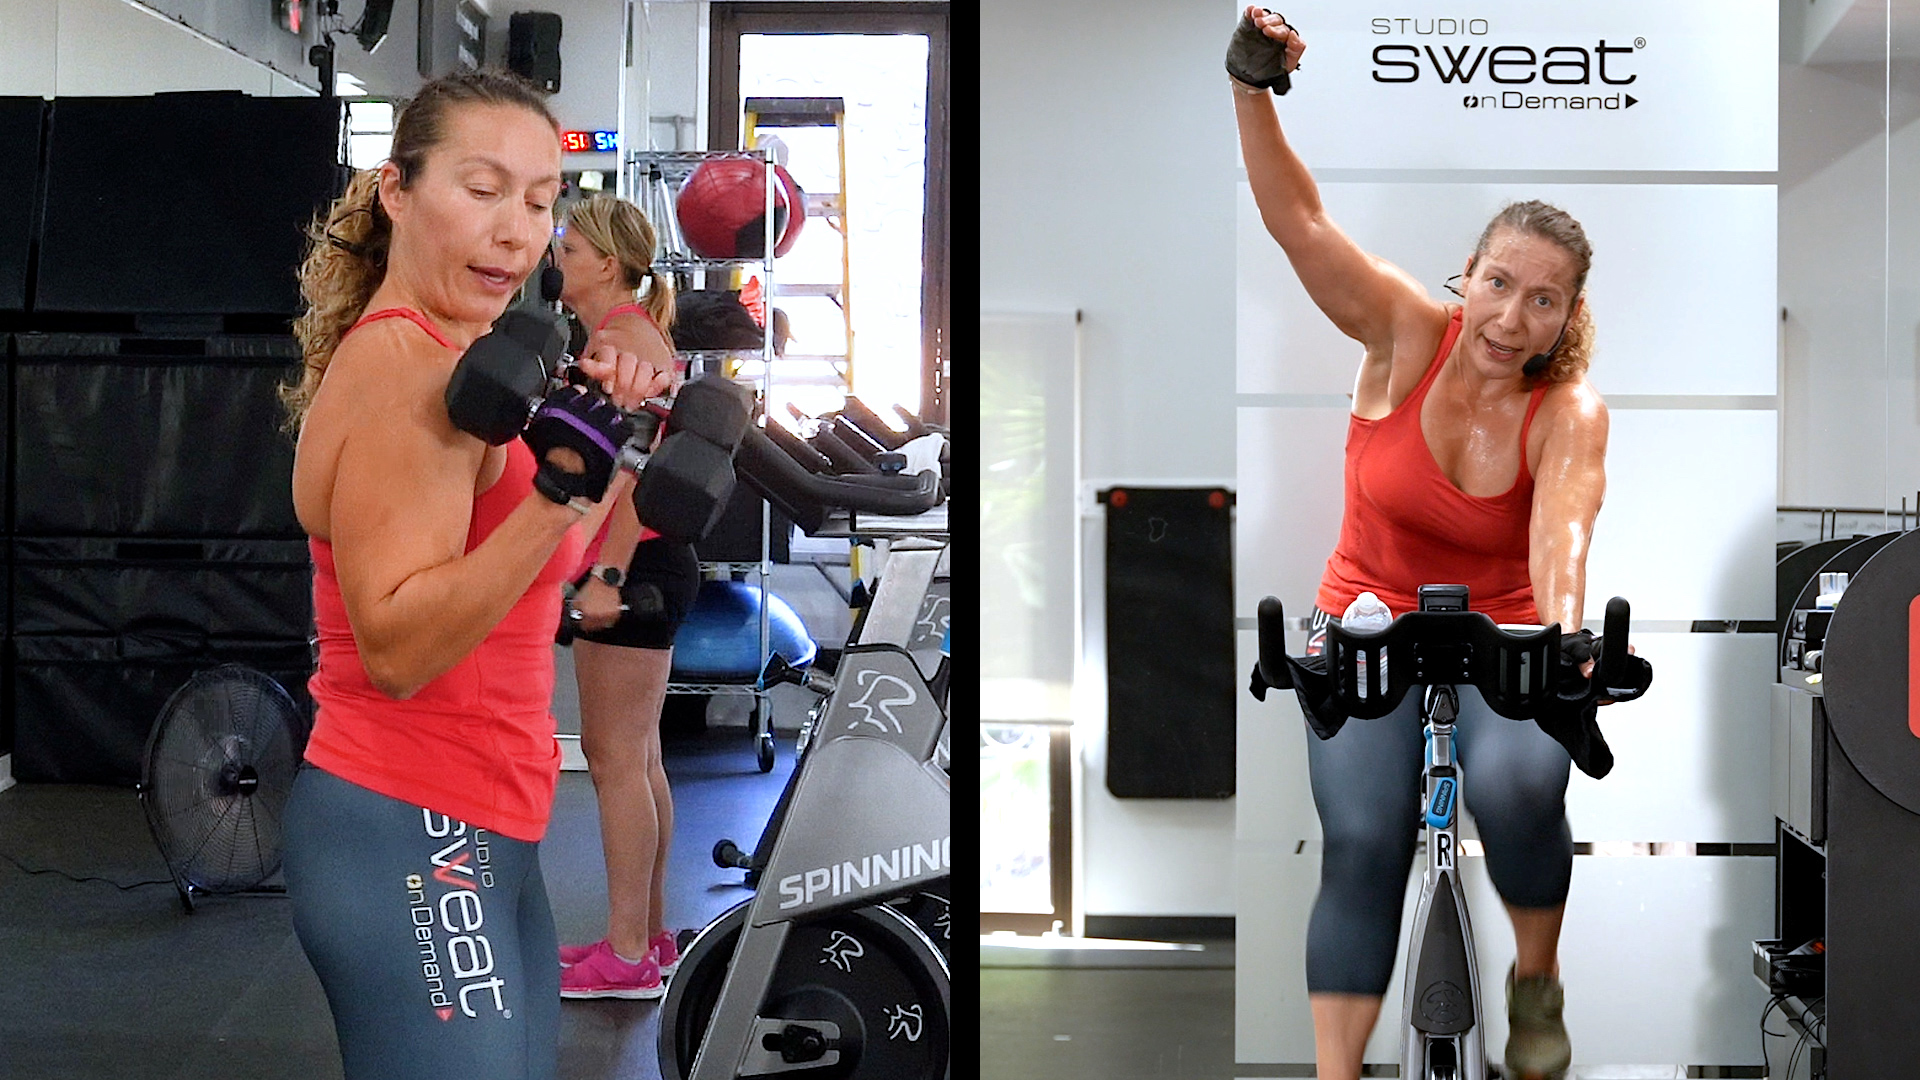 Online Cycling Classes Spin® Classes at Home Studio SWEAT onDemand